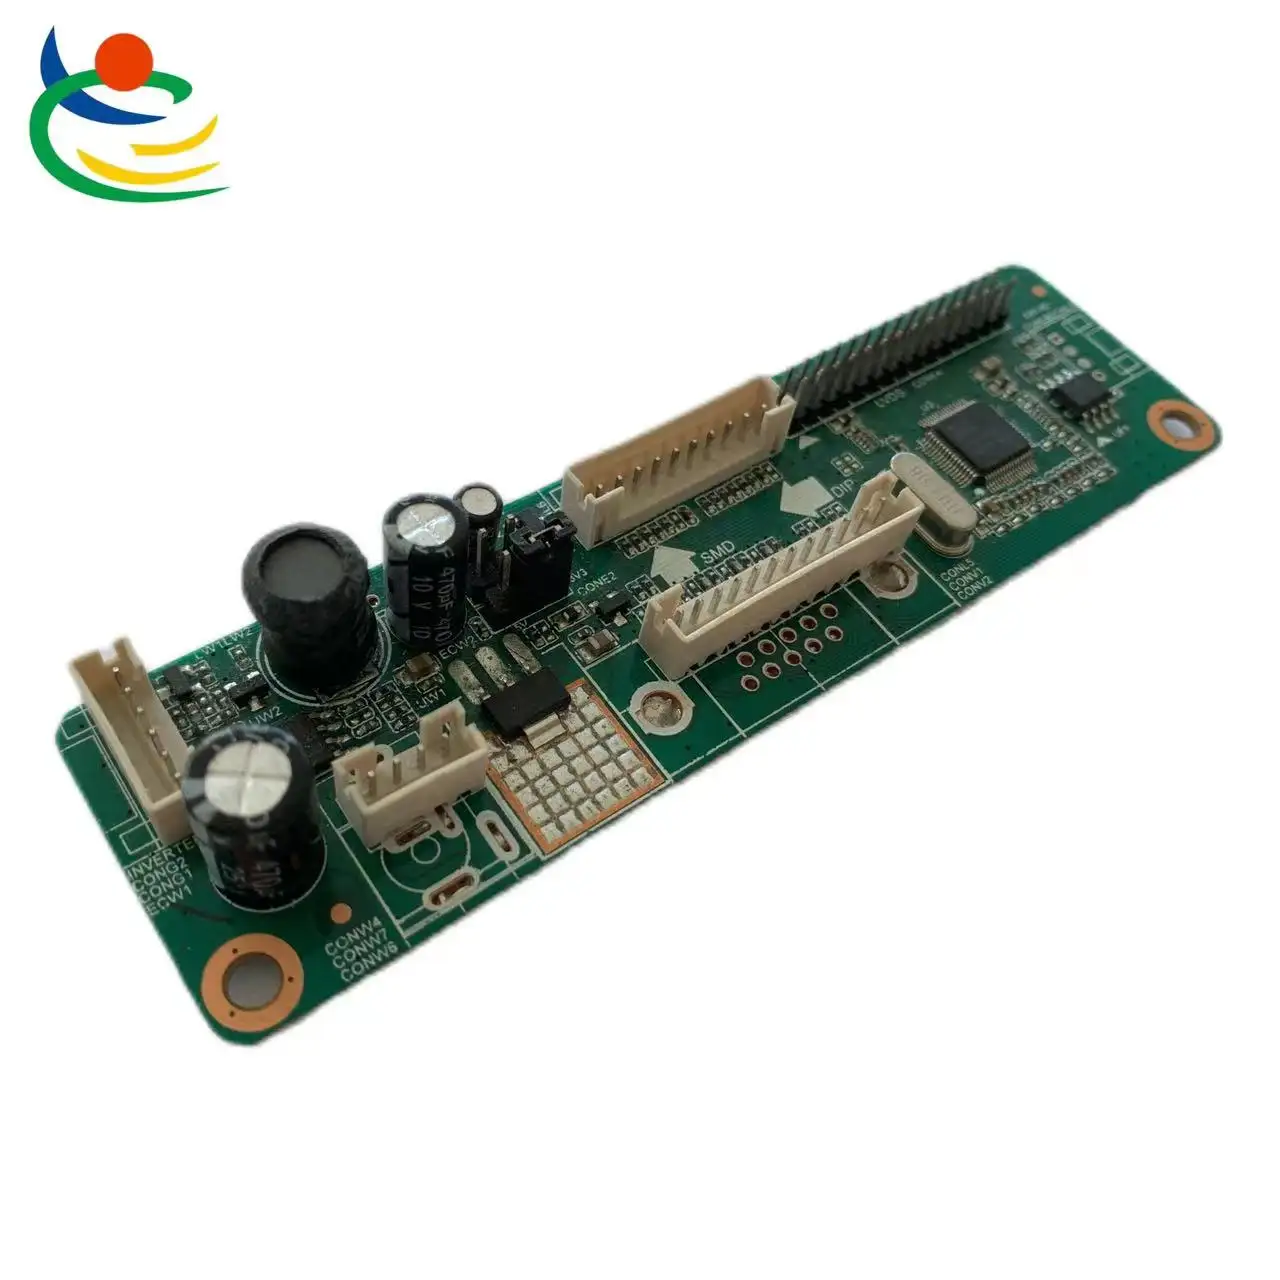 PCBA Electronic Control Board Pcb Assembly Service Monitor Control Panel PCBA Board For Display Controller